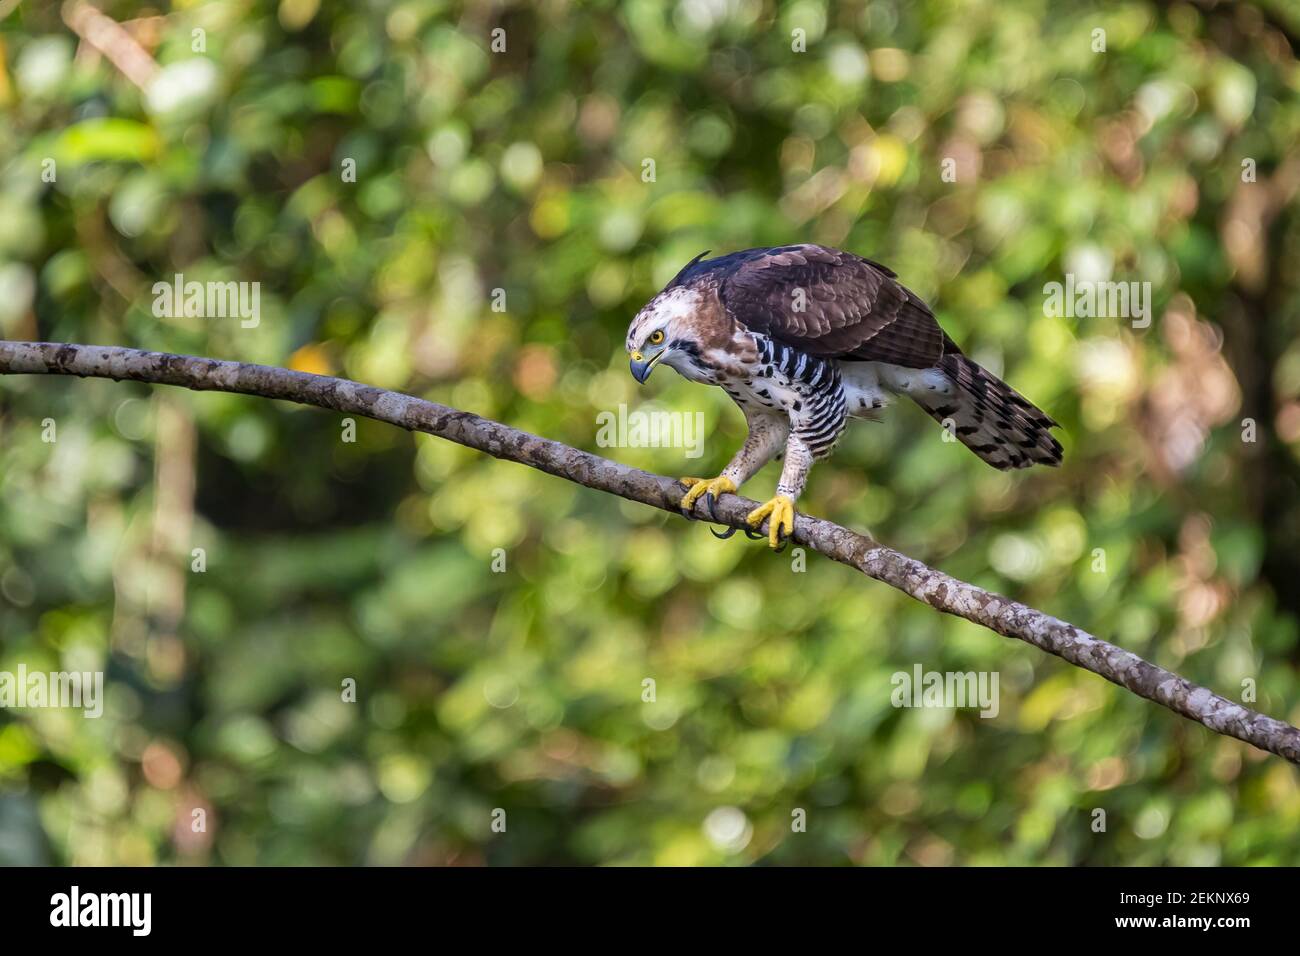 Juvenile Ornate Hawk-Eagle (Spizaetus ornatus) hunting with intense concentration and look on its eyes, Costa Rica Stock Photo